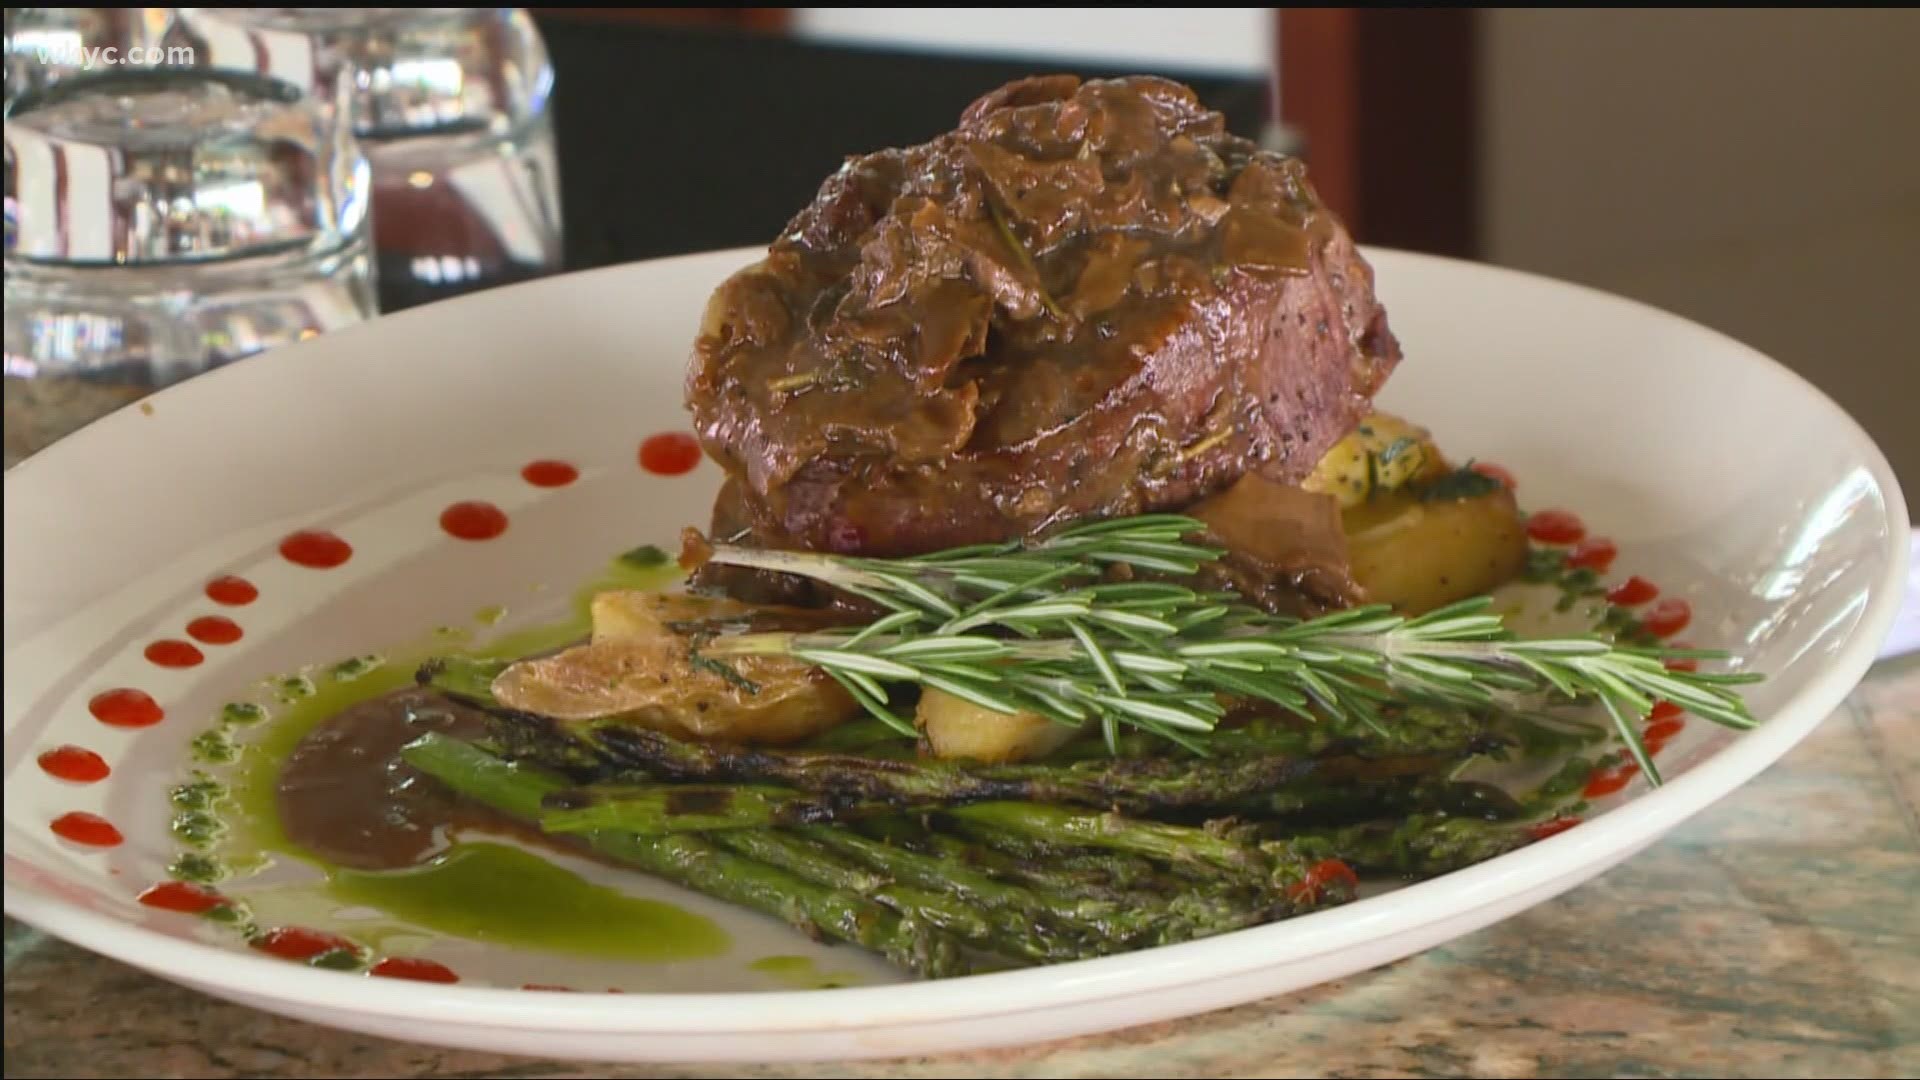 Nov. 11, 2020: Cleveland Restaurant Week is back, and 3News' Austin Love explores some of the good eats you can enjoy!